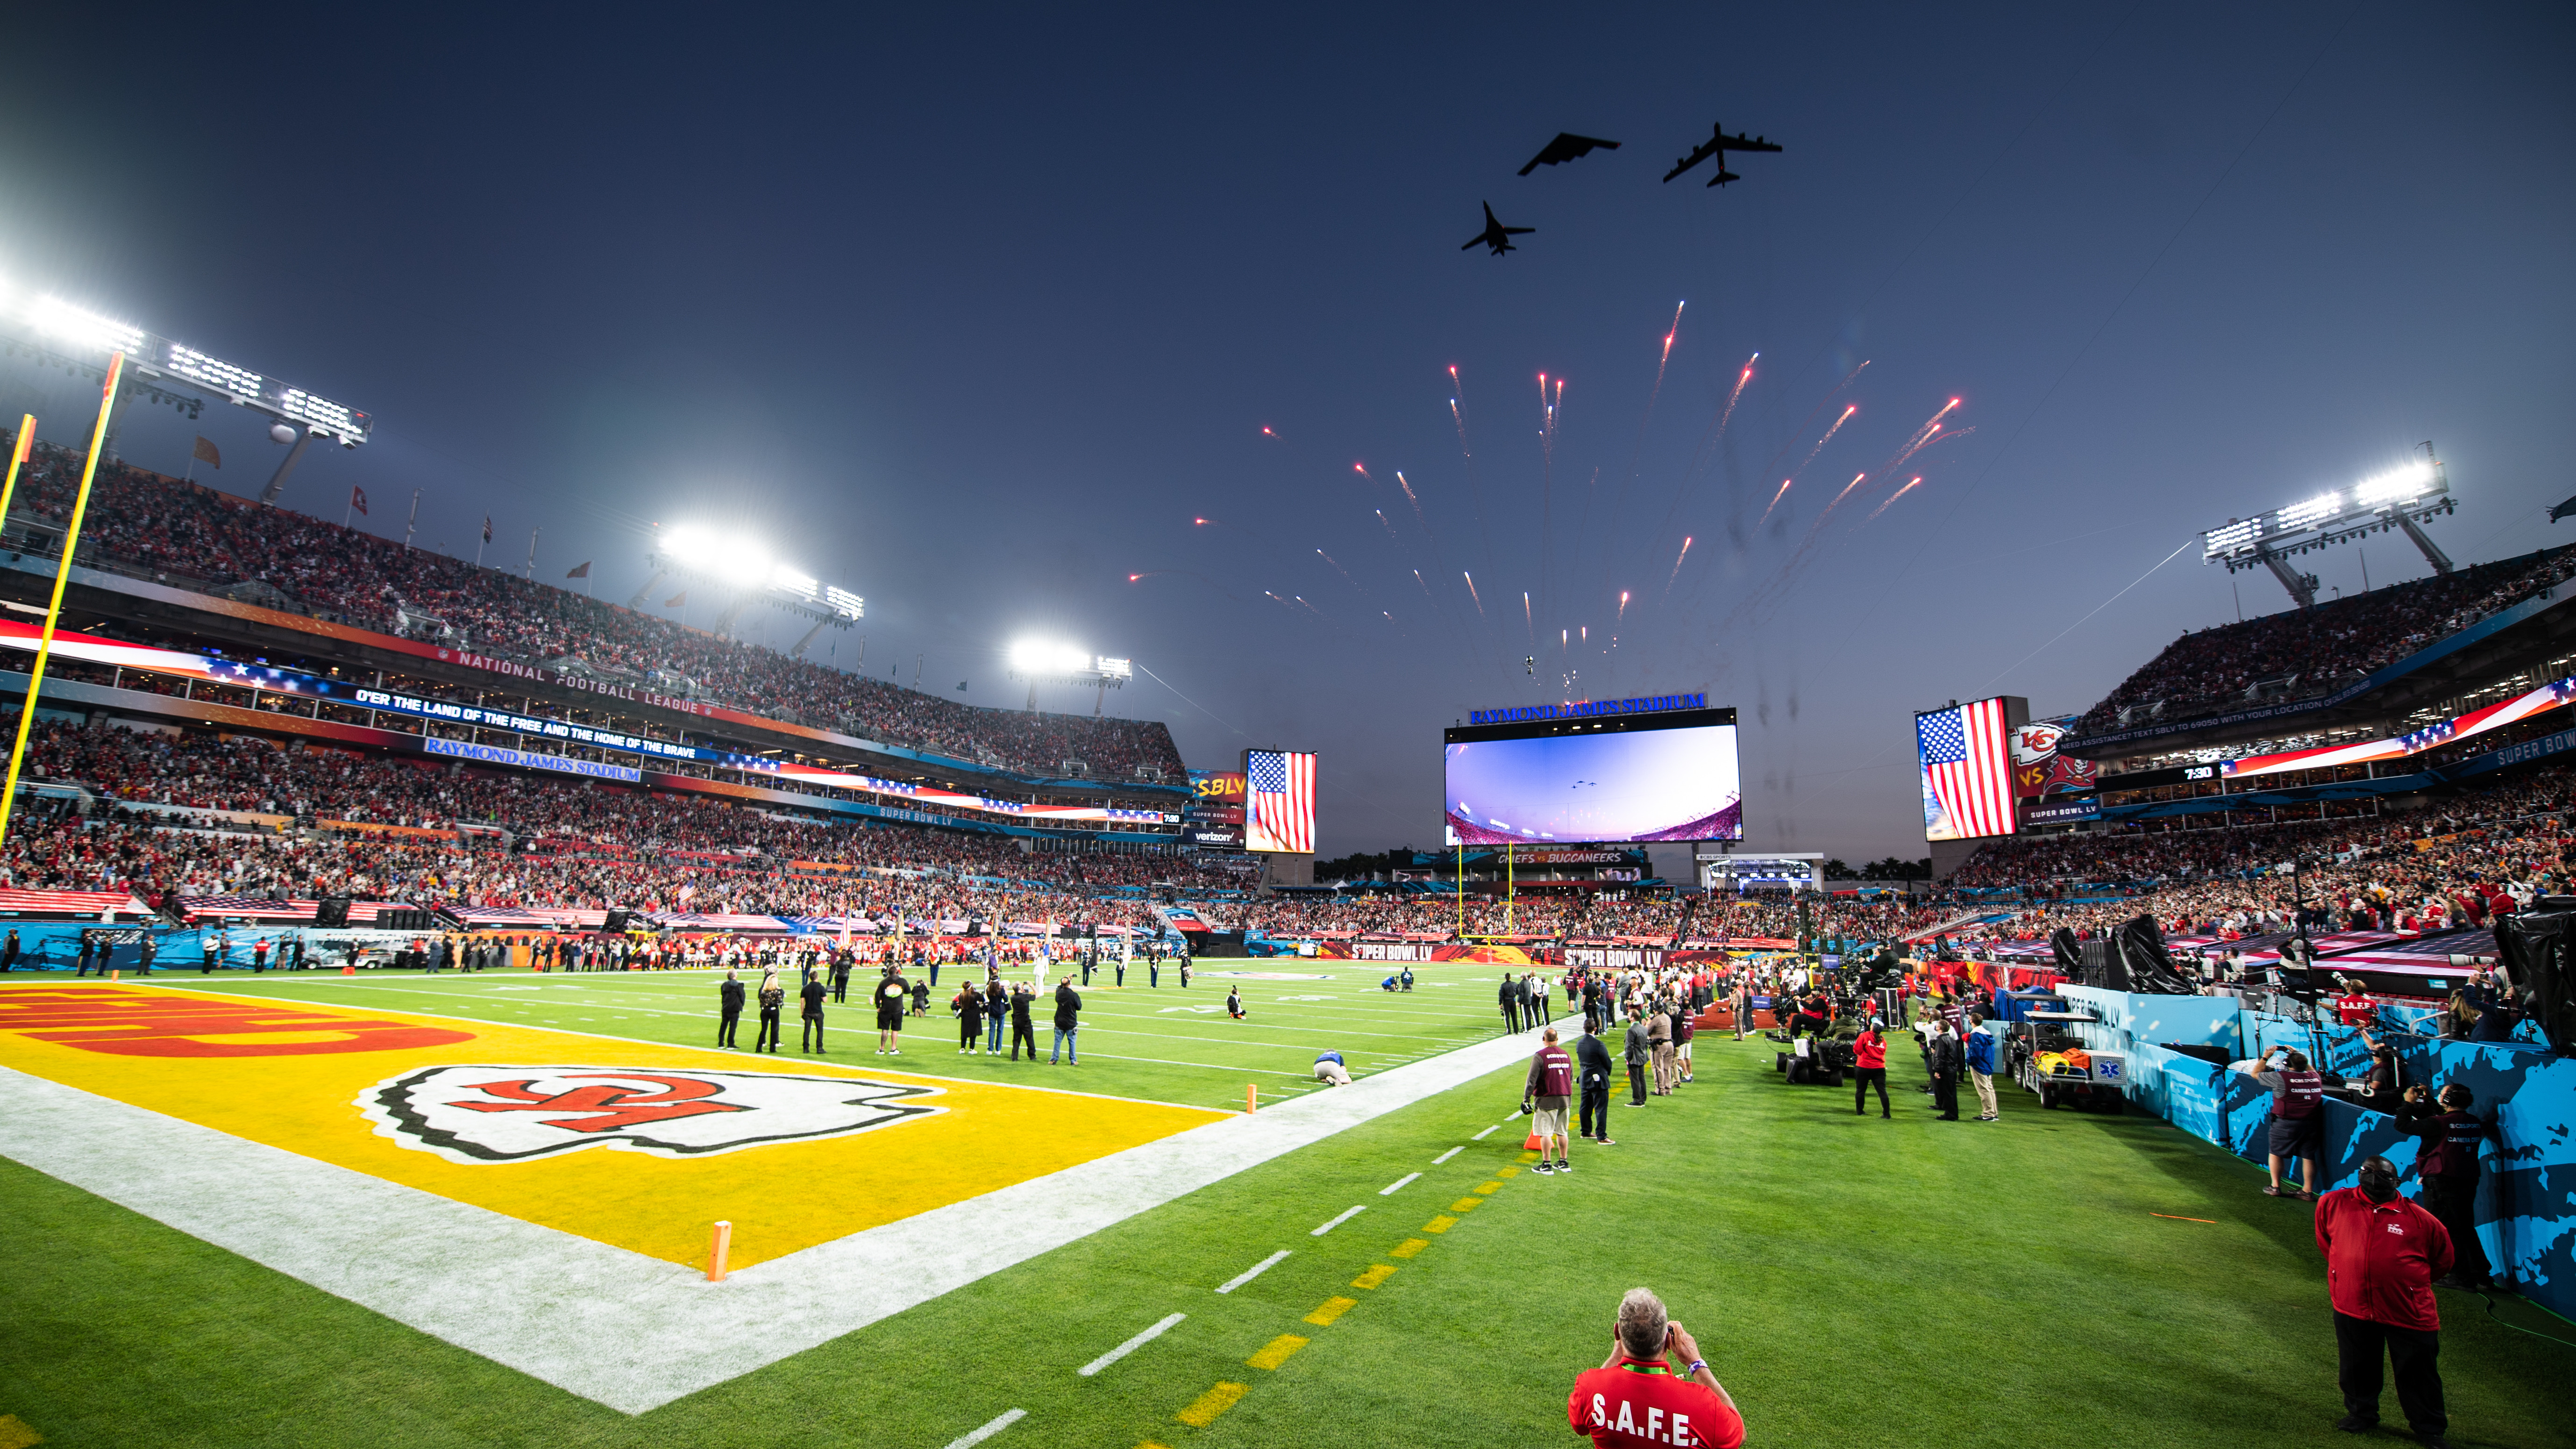 Super Bowl LV flyover took months of planning, coordination > Air